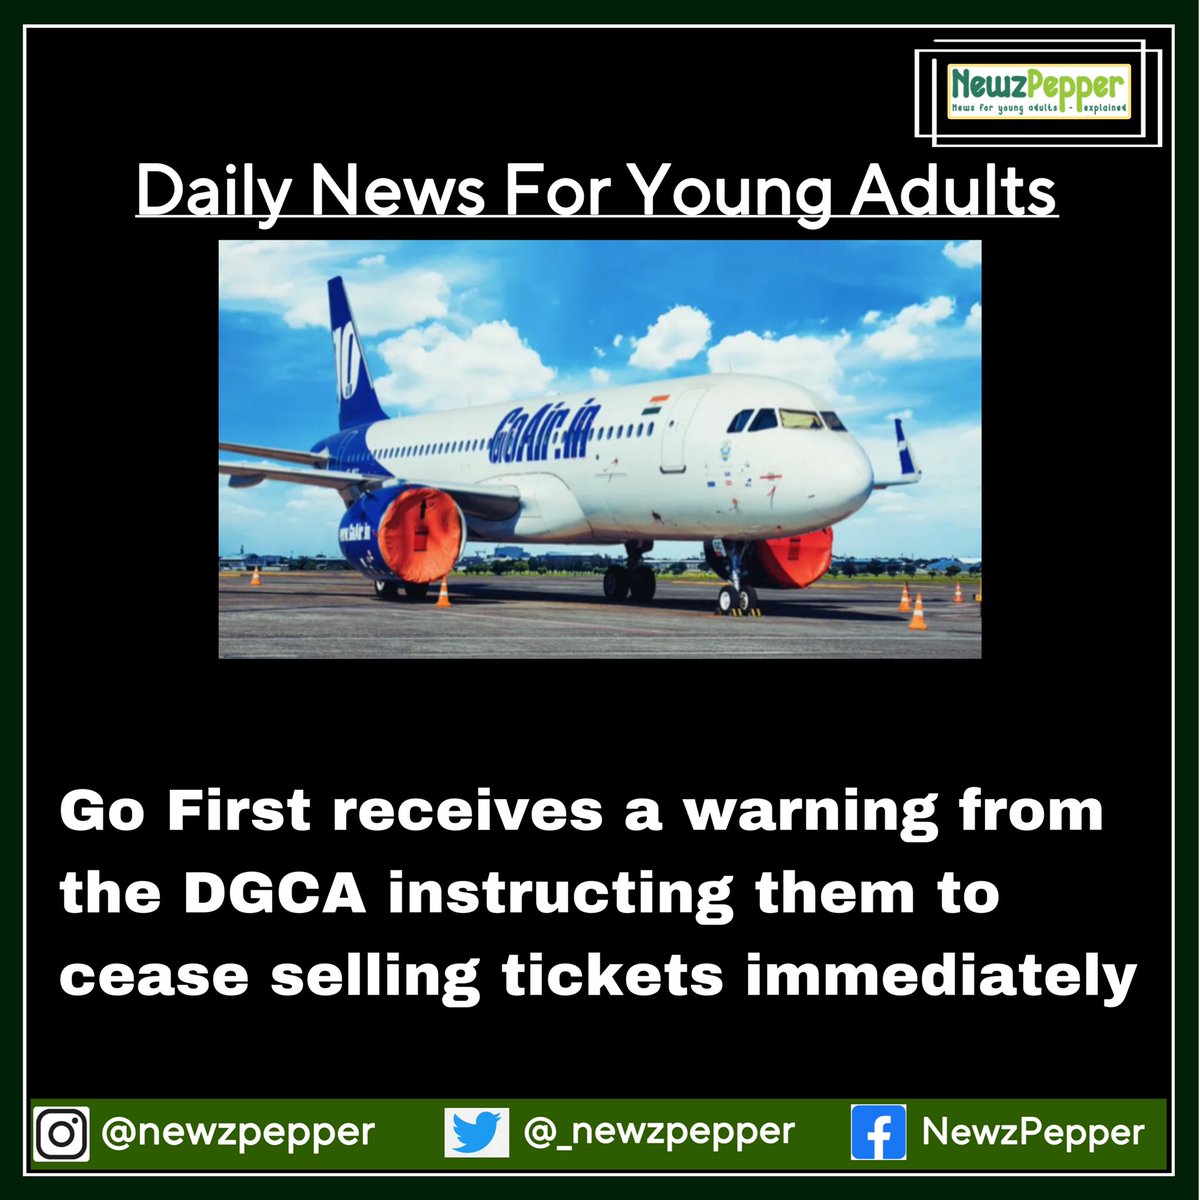 To read the full article, visit newzpepper.com!

#indianschools #news #newsupdate #newspaper #dailynews #dailynewspaper #follow #instadaily #instagram #india #flights #aai #airport #indianaviation #aviation #dgca #gofirst #gofirstairways #airlines #indianairlines